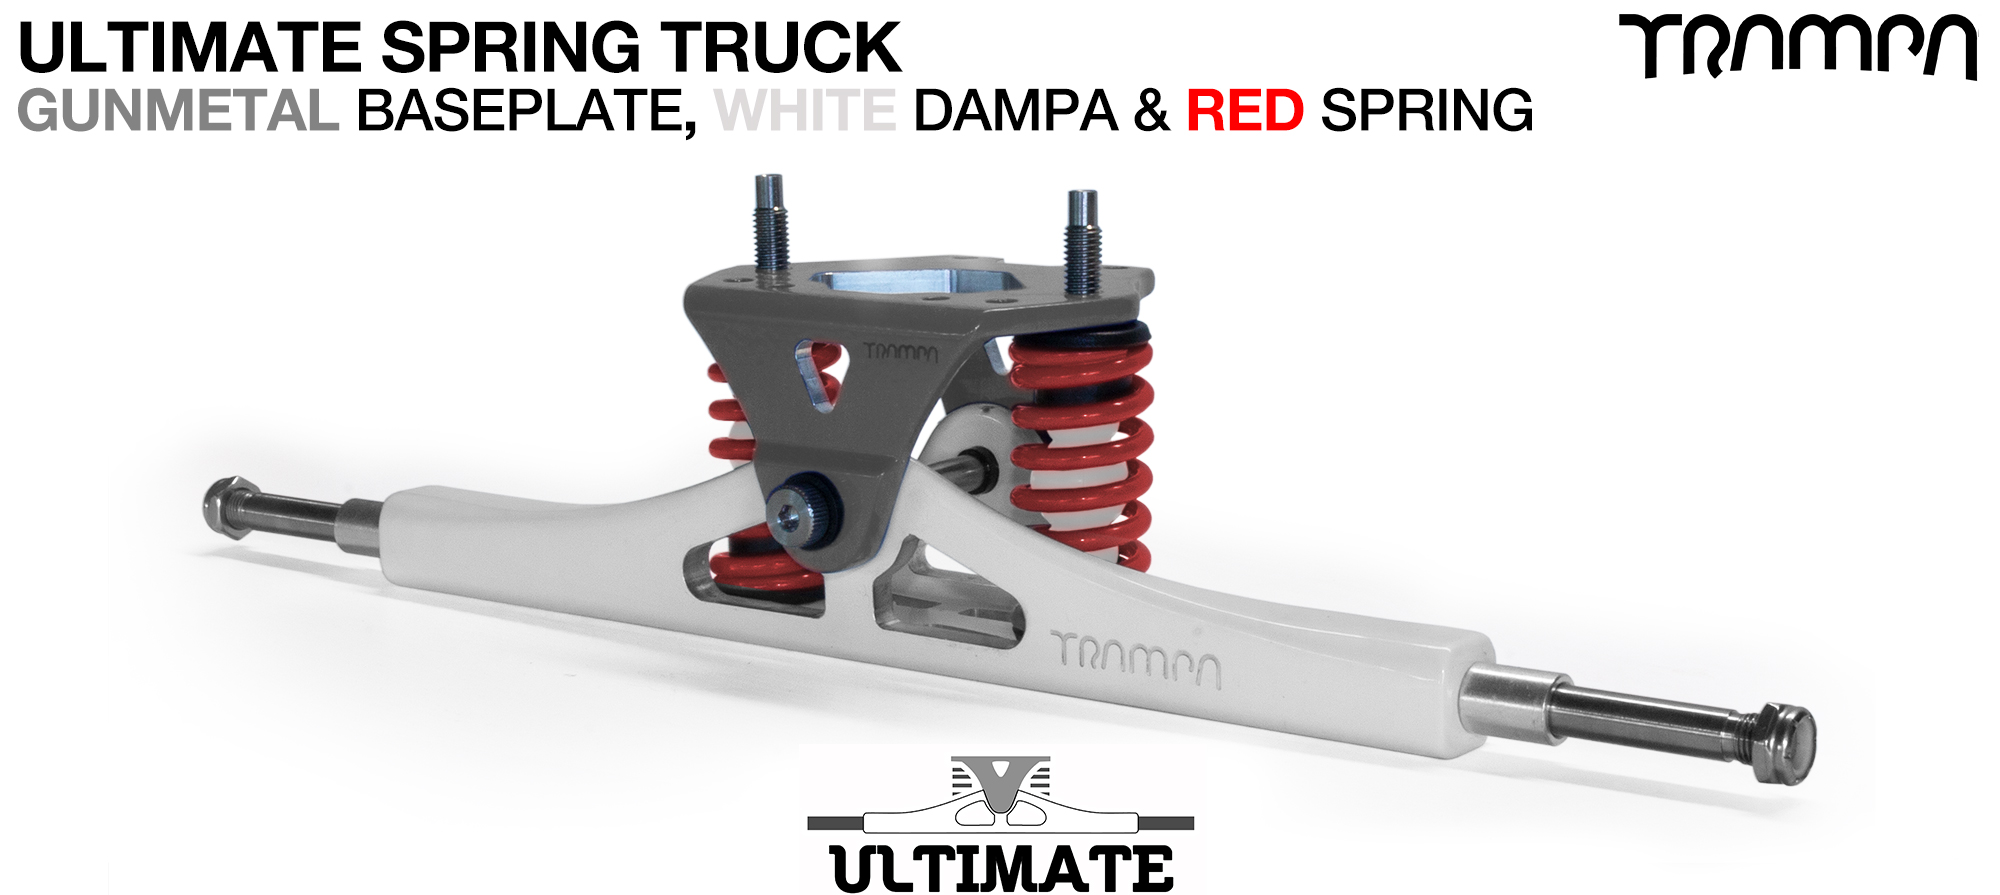 ULTIMATE ATB Truck - WHITE Hanger with TITANIUM Axles 1 Spring position